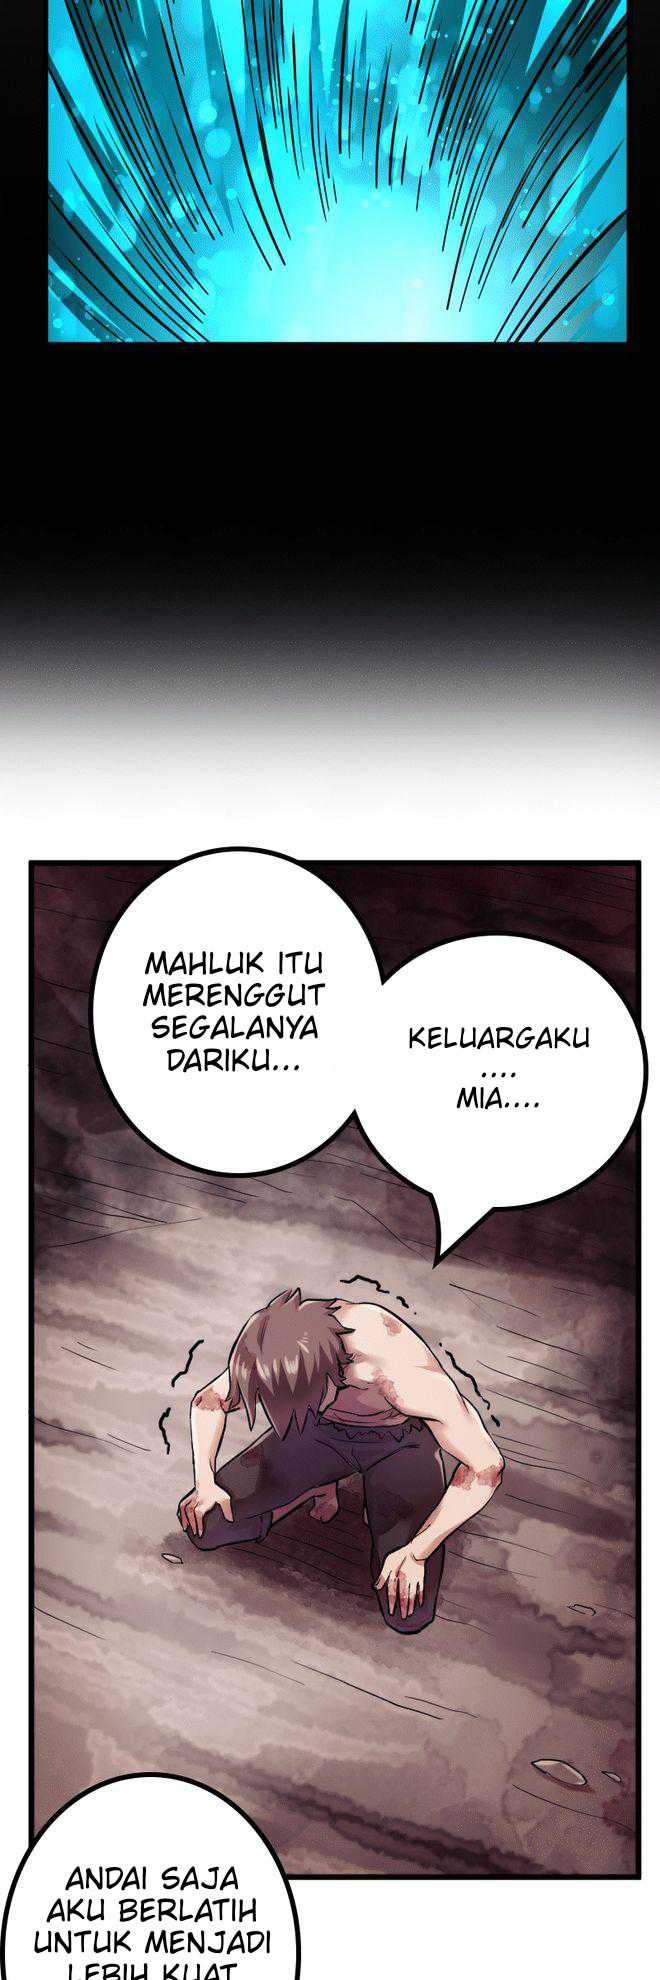 DevilUp Chapter 01